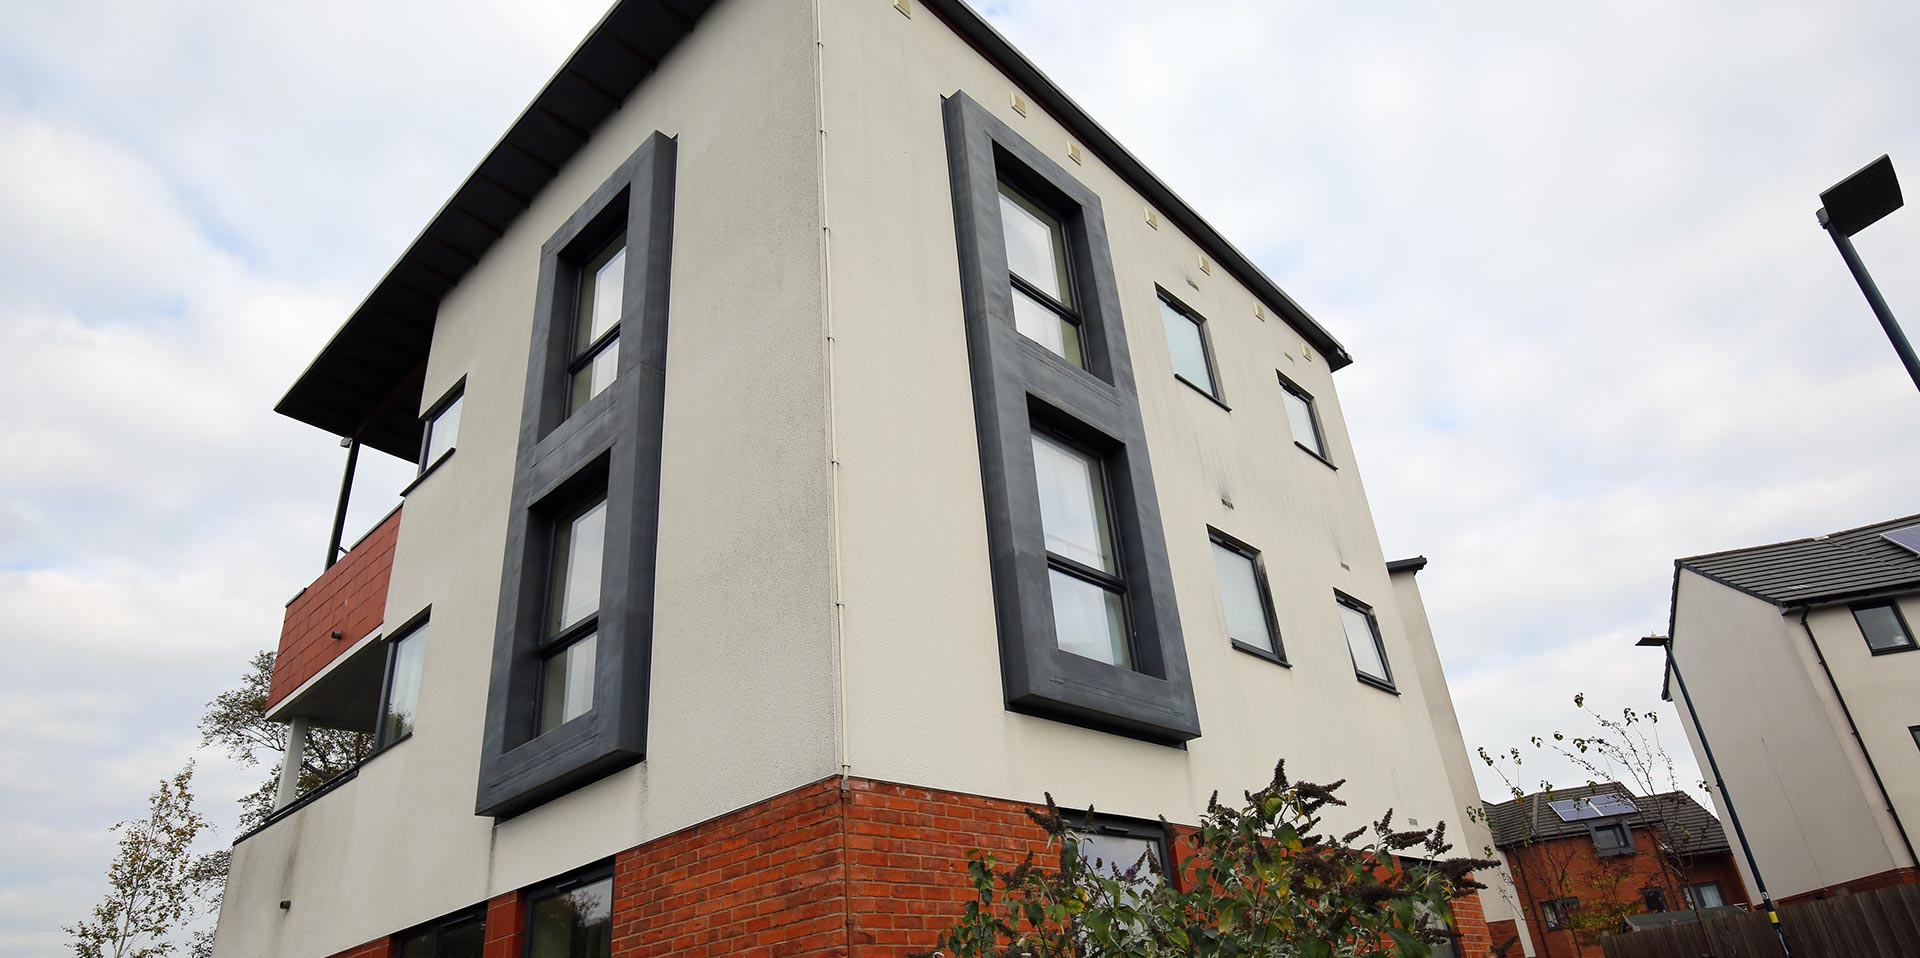 New build property with casement windows in grey PVCu